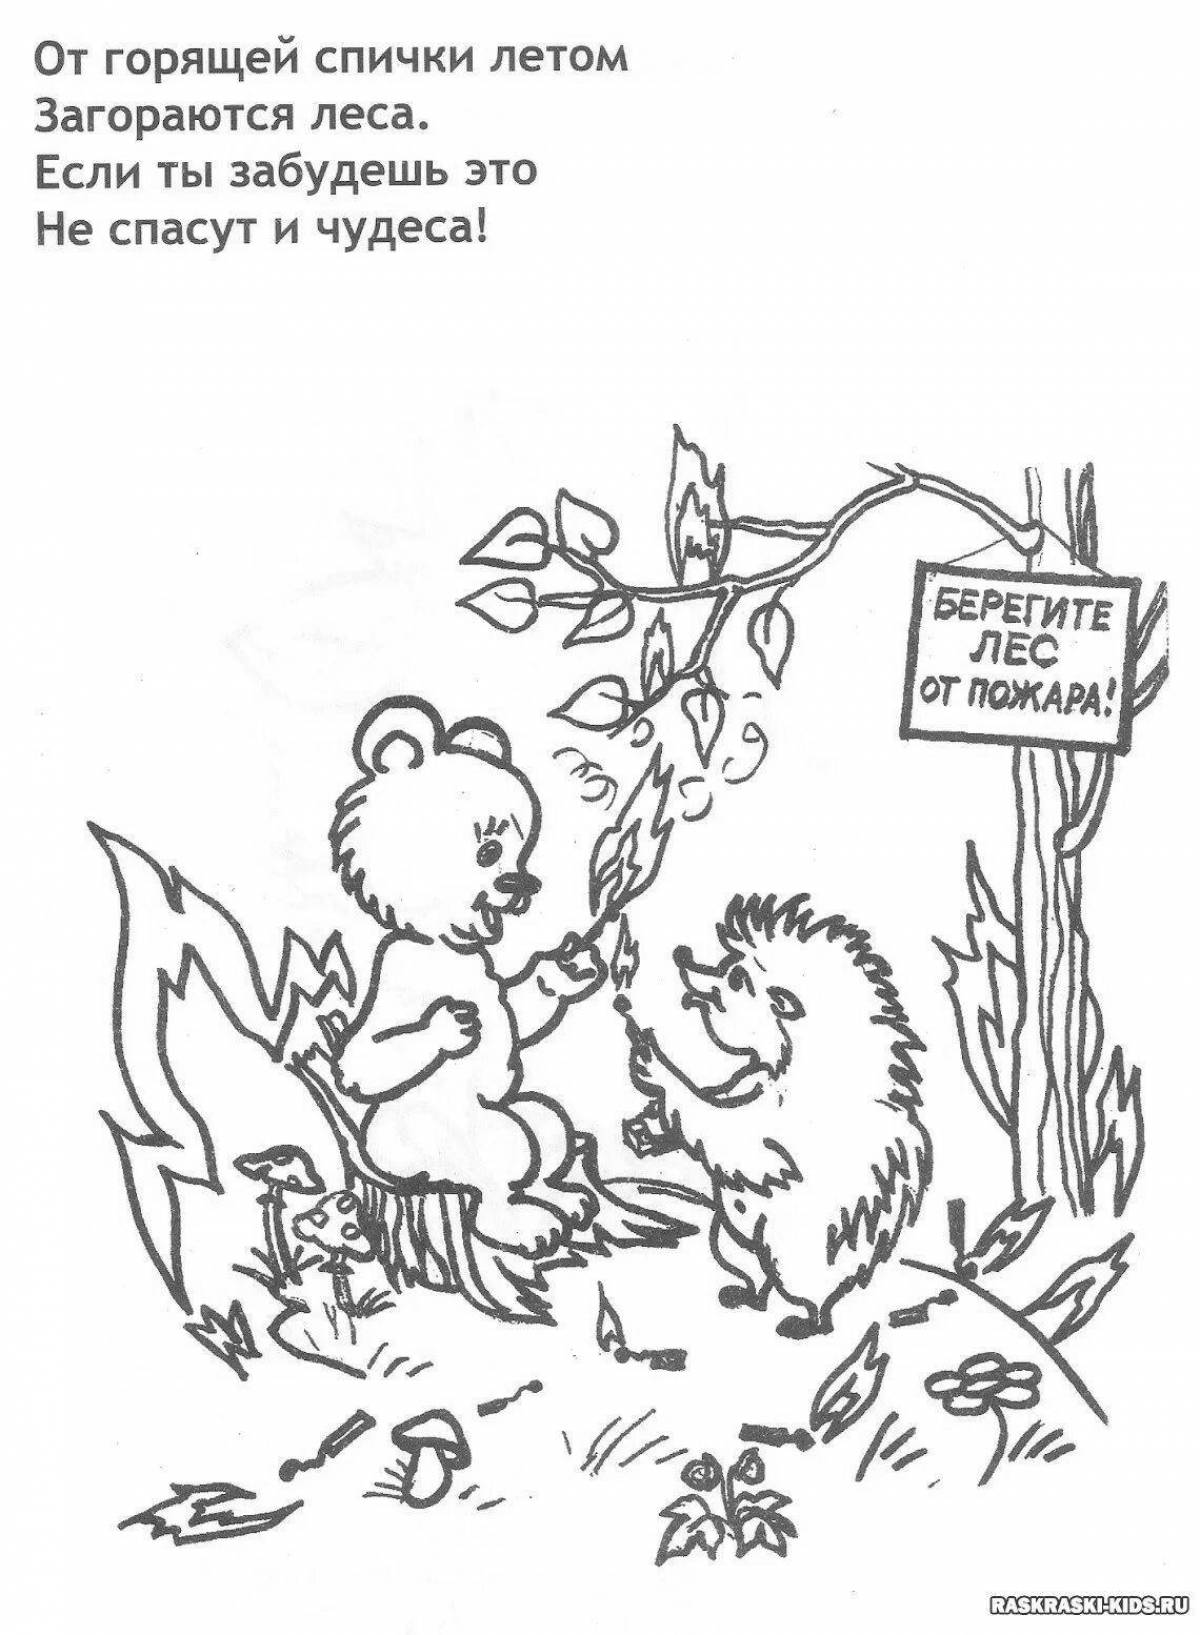 Children's coloring book rules of conduct in the forest